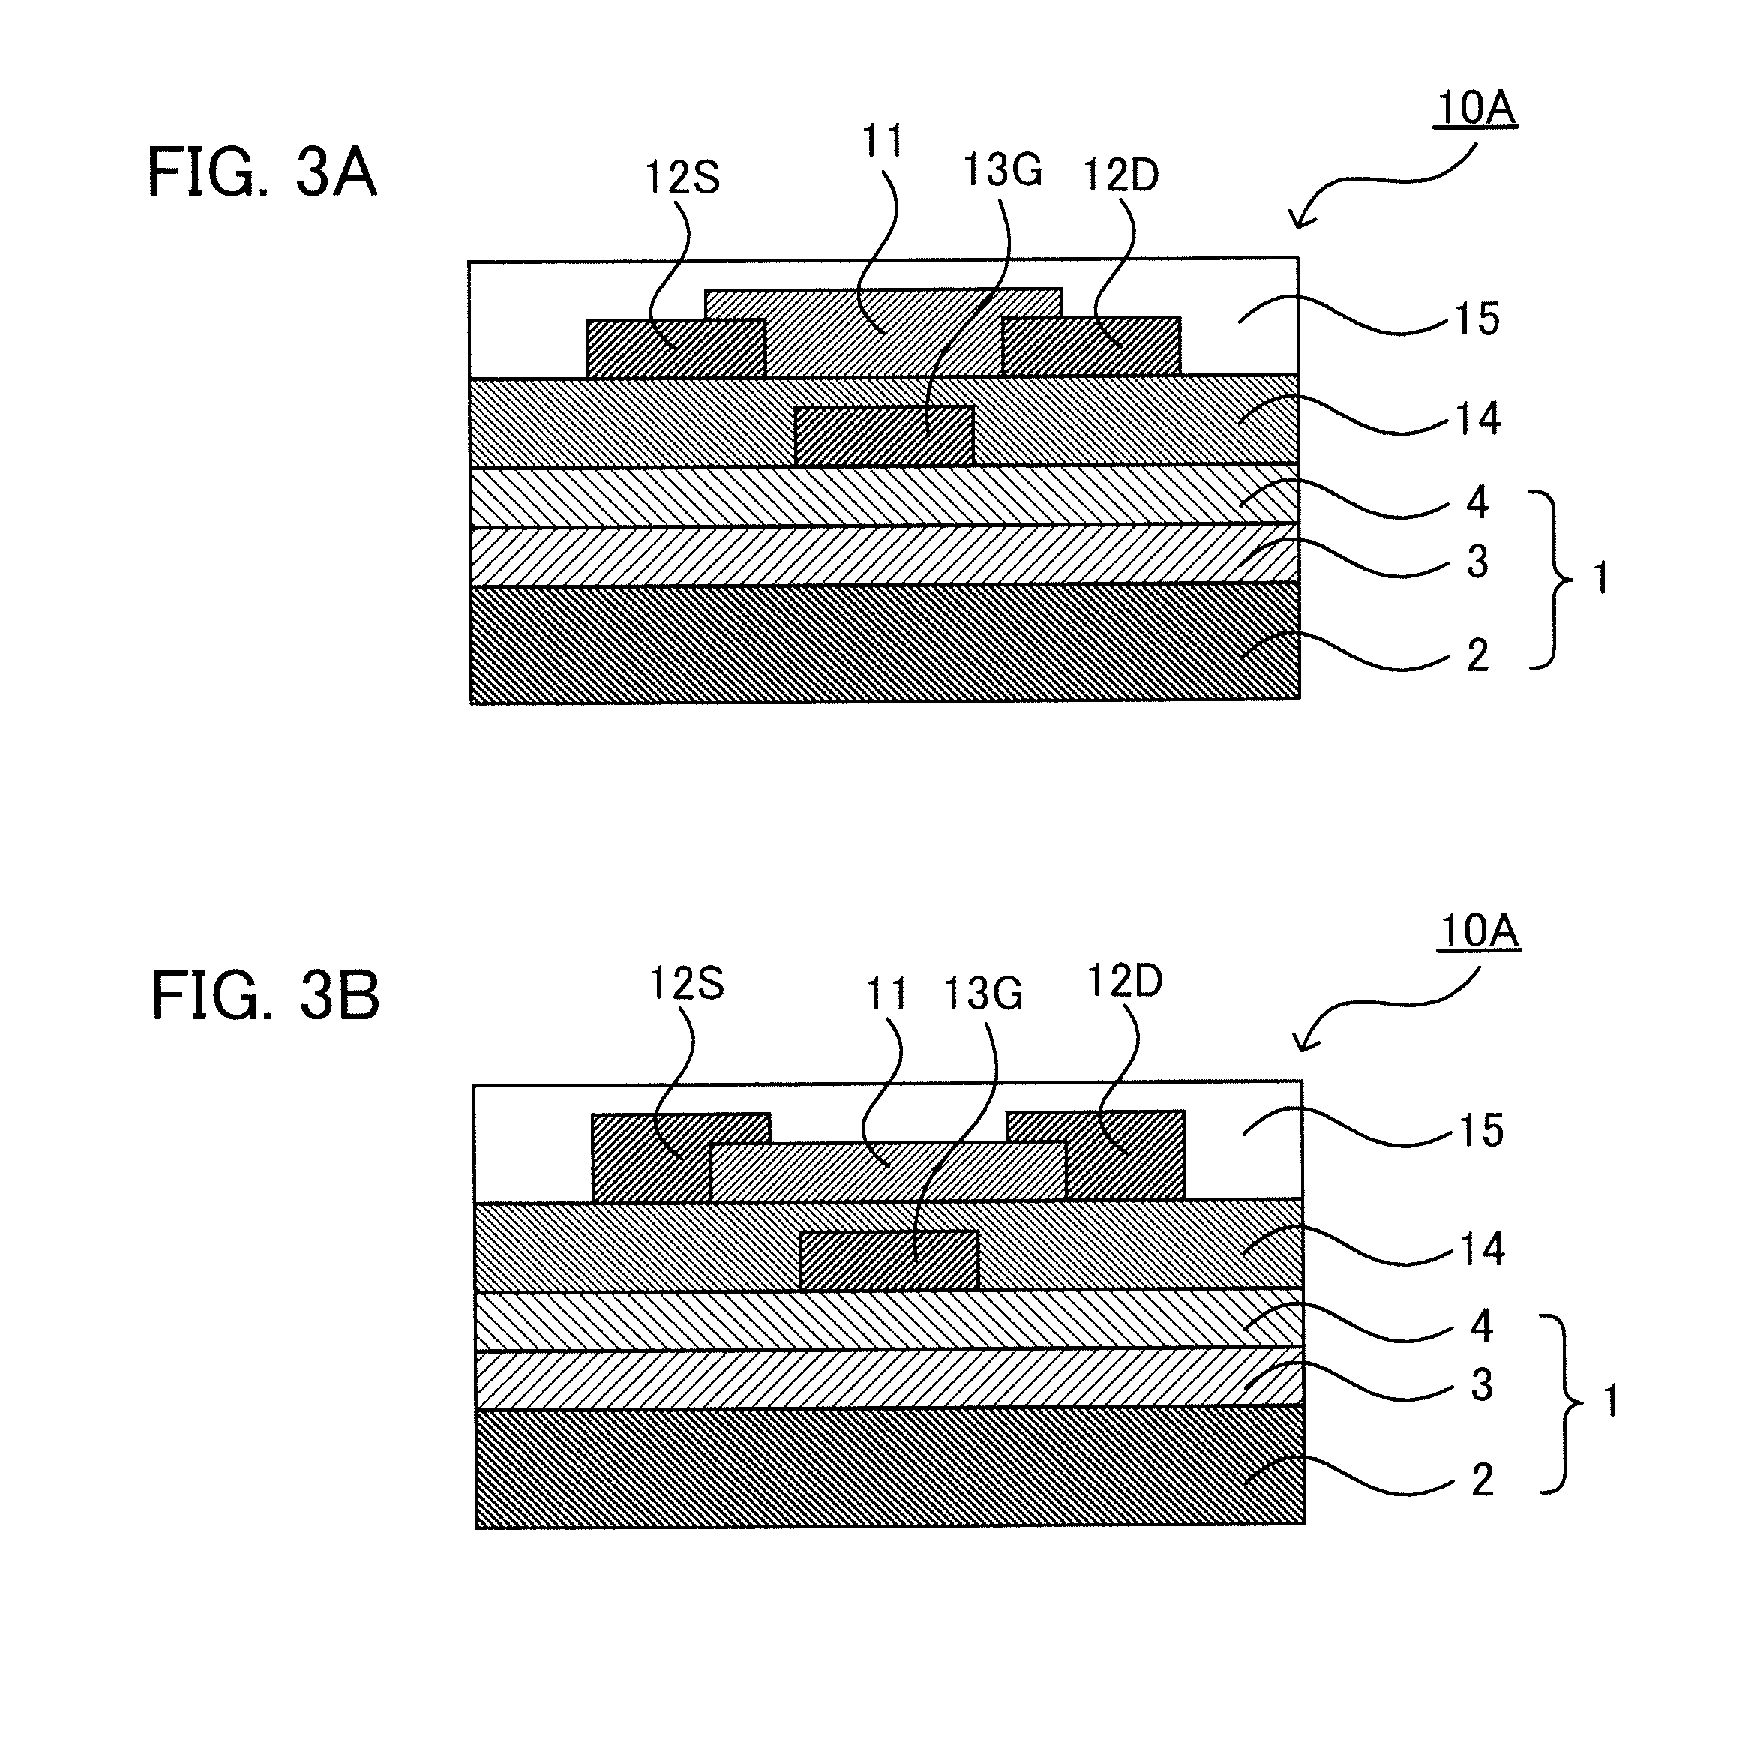 Substrate for flexible device, thin film transistor substrate for flexible device, flexible device, substrate for thin film element, thin film element, thin film transistor, method for manufacturing substrate for thin film element, method for manufacturing thin film element, and method for manufacturing thin film transistor